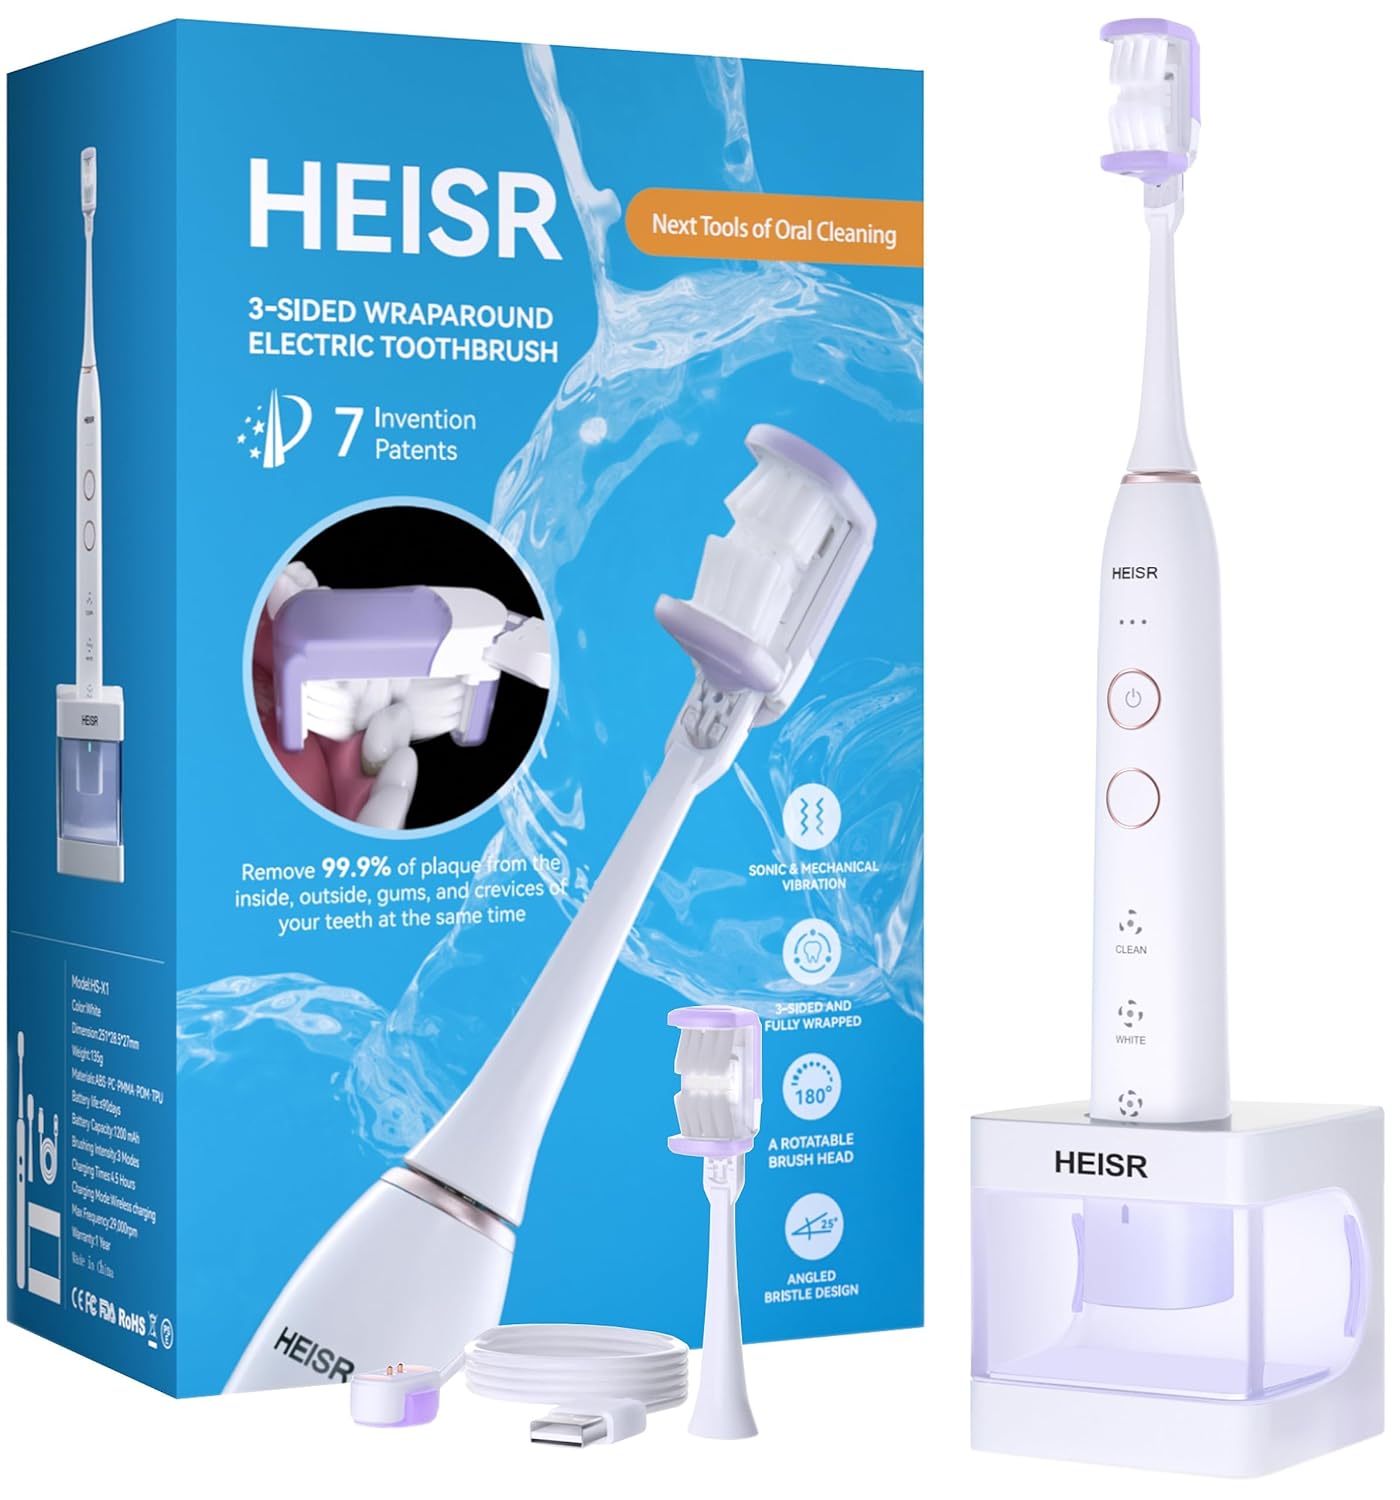 Heisr 3-Sided Wraparound Sonic Whitening Electric Toothbrush for Adults,180° Rotatable Mechanical Brush Head,25° Angled Soft Bristle,3 Modes with Timer,Rechargeable,One Charging for 90 Days,White